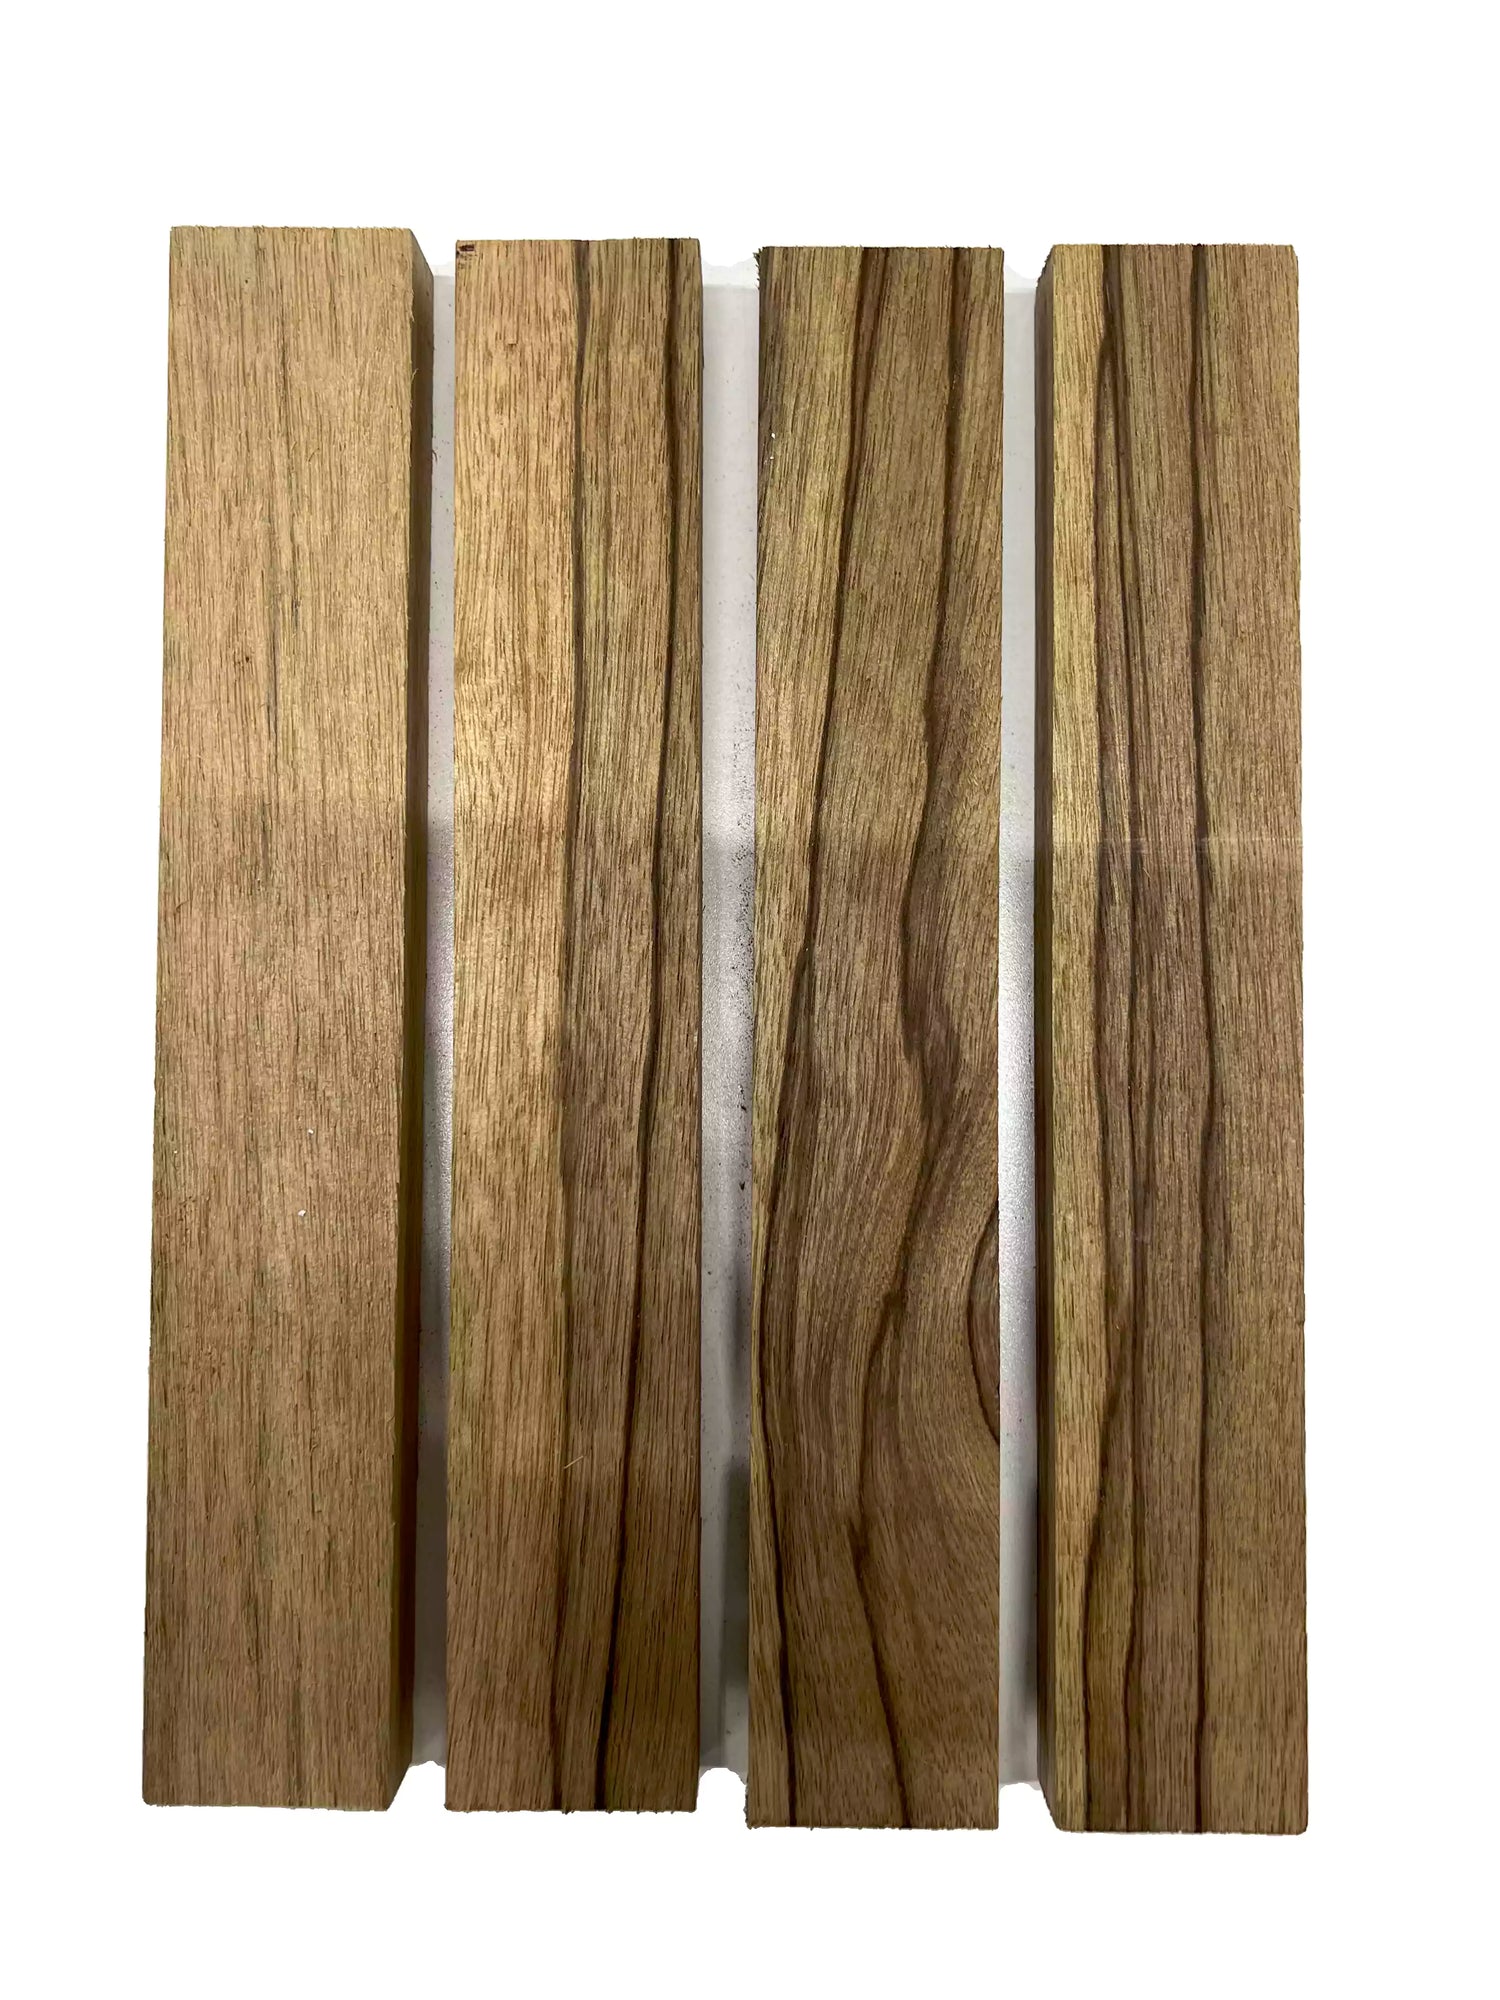 Pack of 4, Black Limba Thin Stock Three Dimensional Lumber Board 12&quot; x 2&quot; x 3/4&quot; 